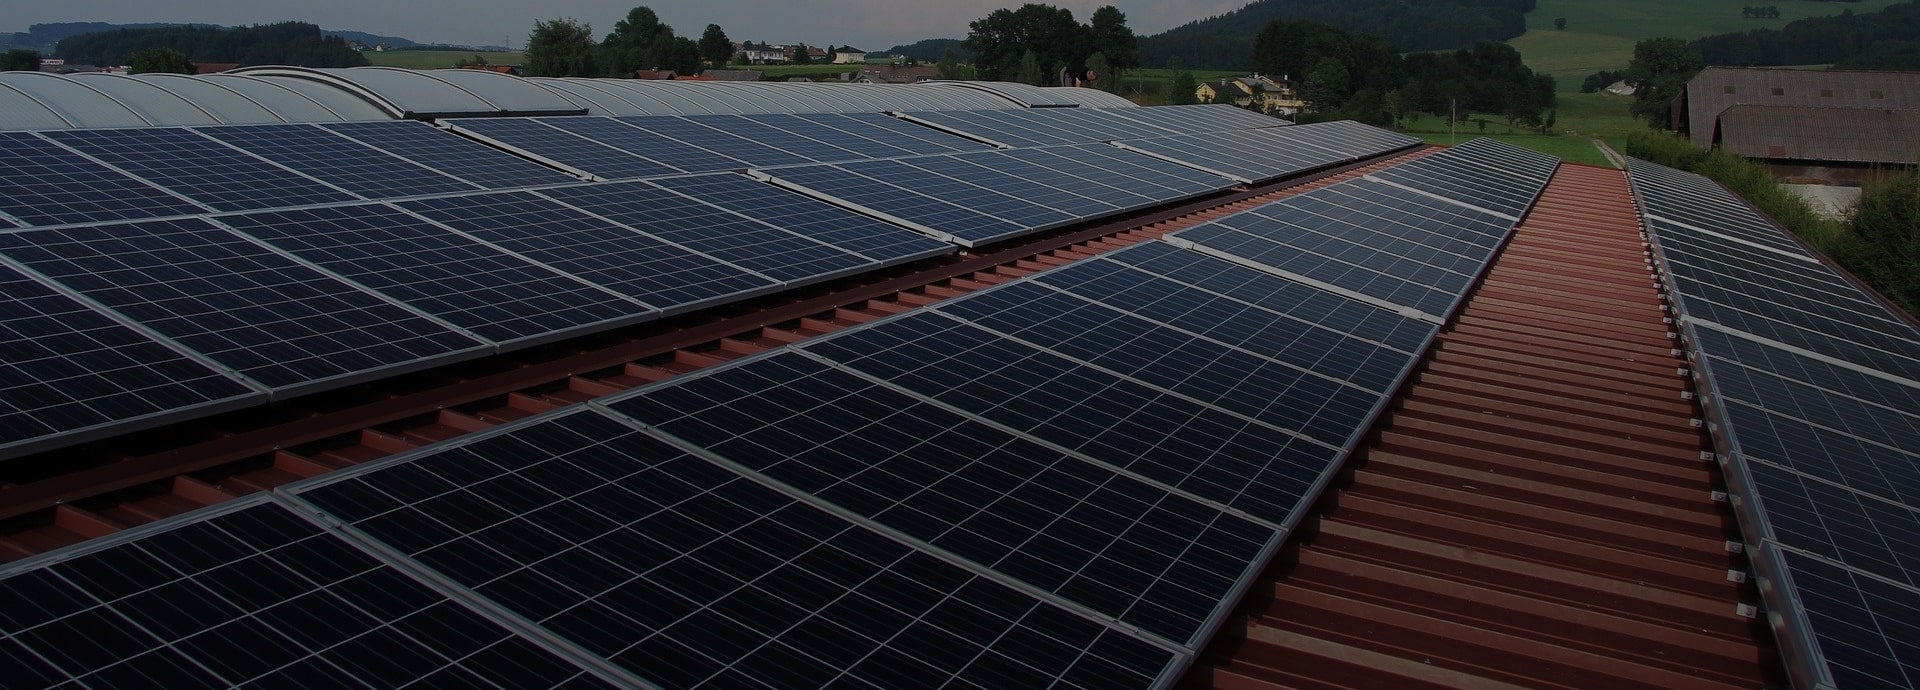 Five Reasons To Use Solar Power In Your Hotel